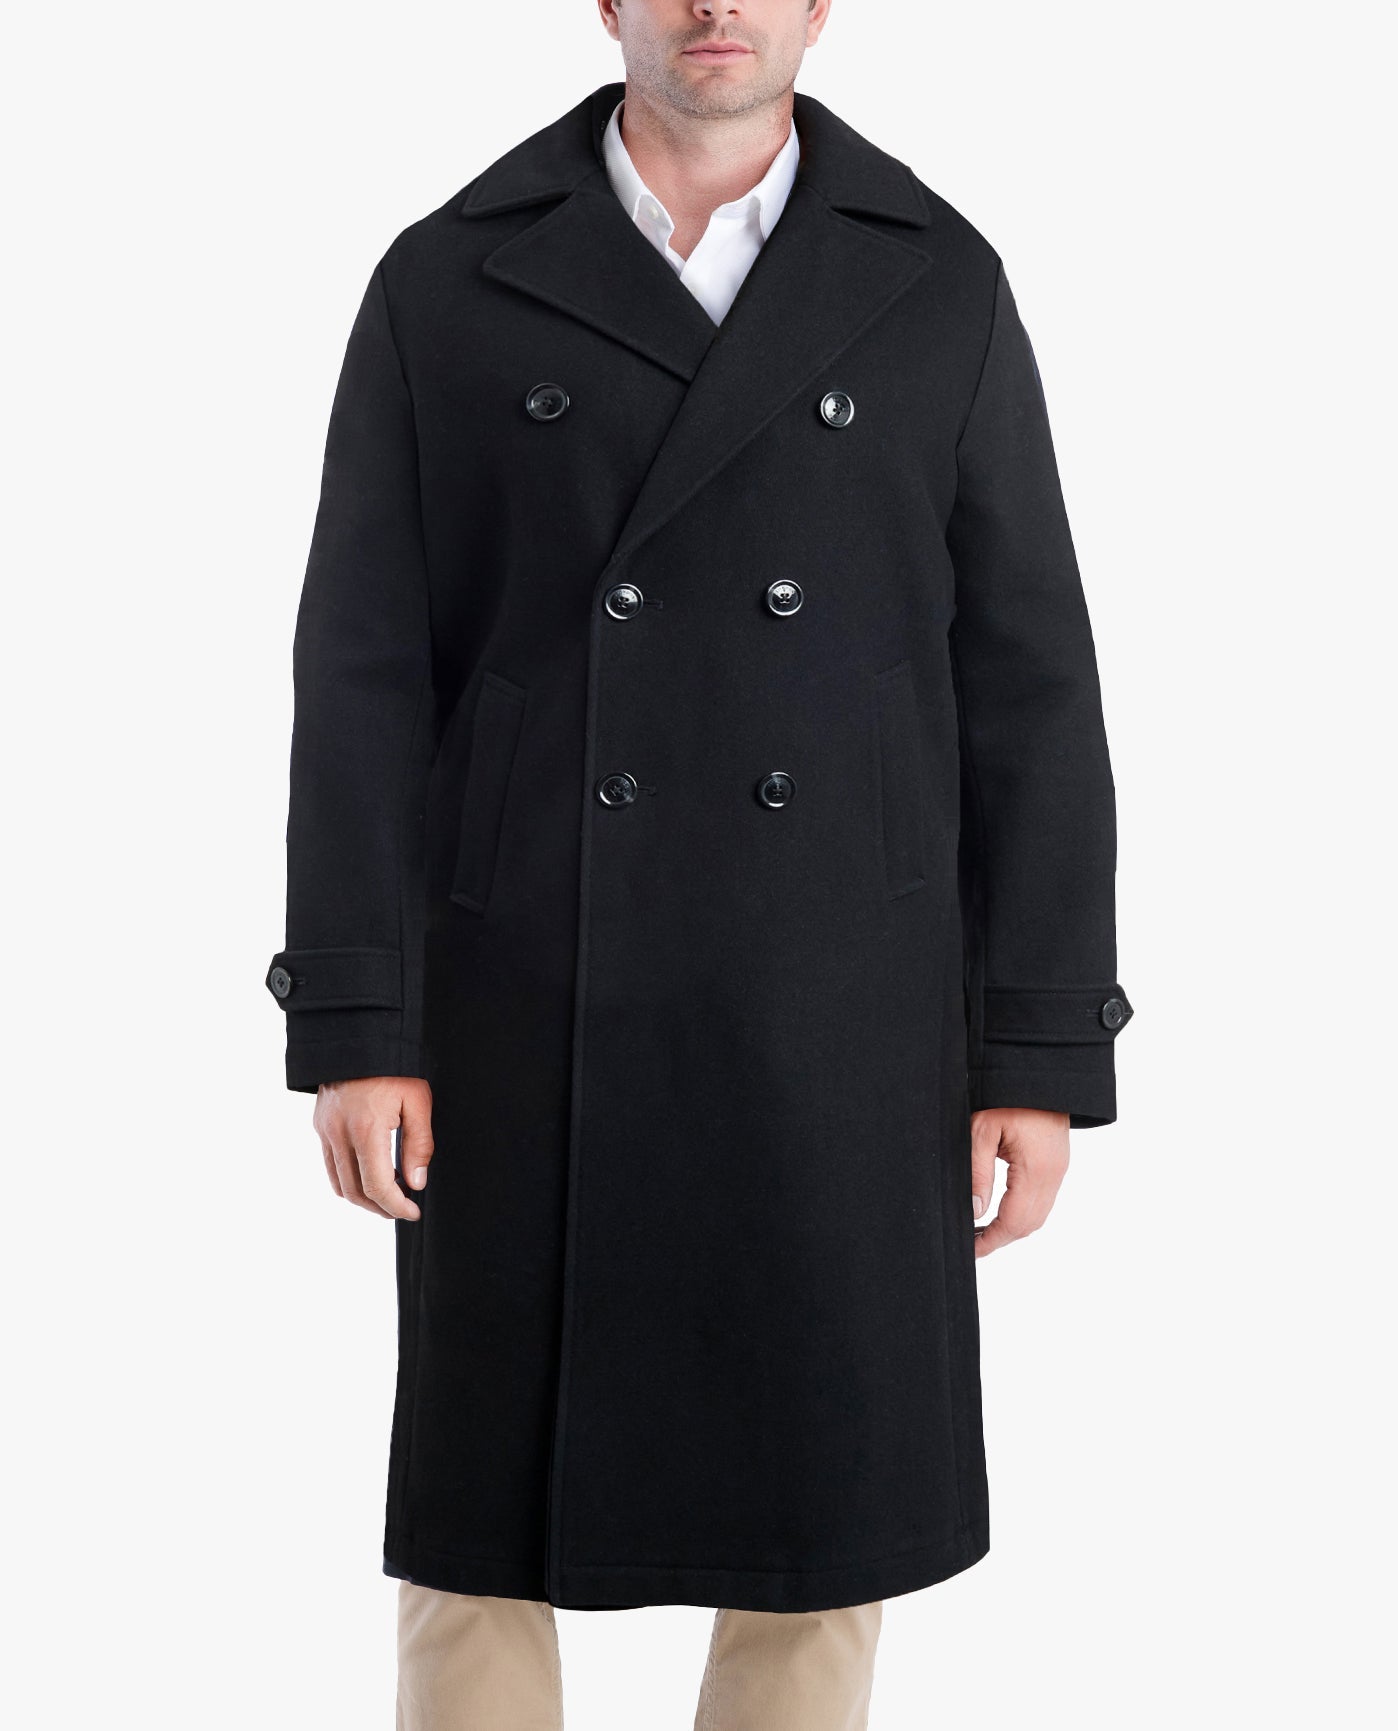 FRONT VIEW OF LILLE 46" OFFICERS COAT | BLACK